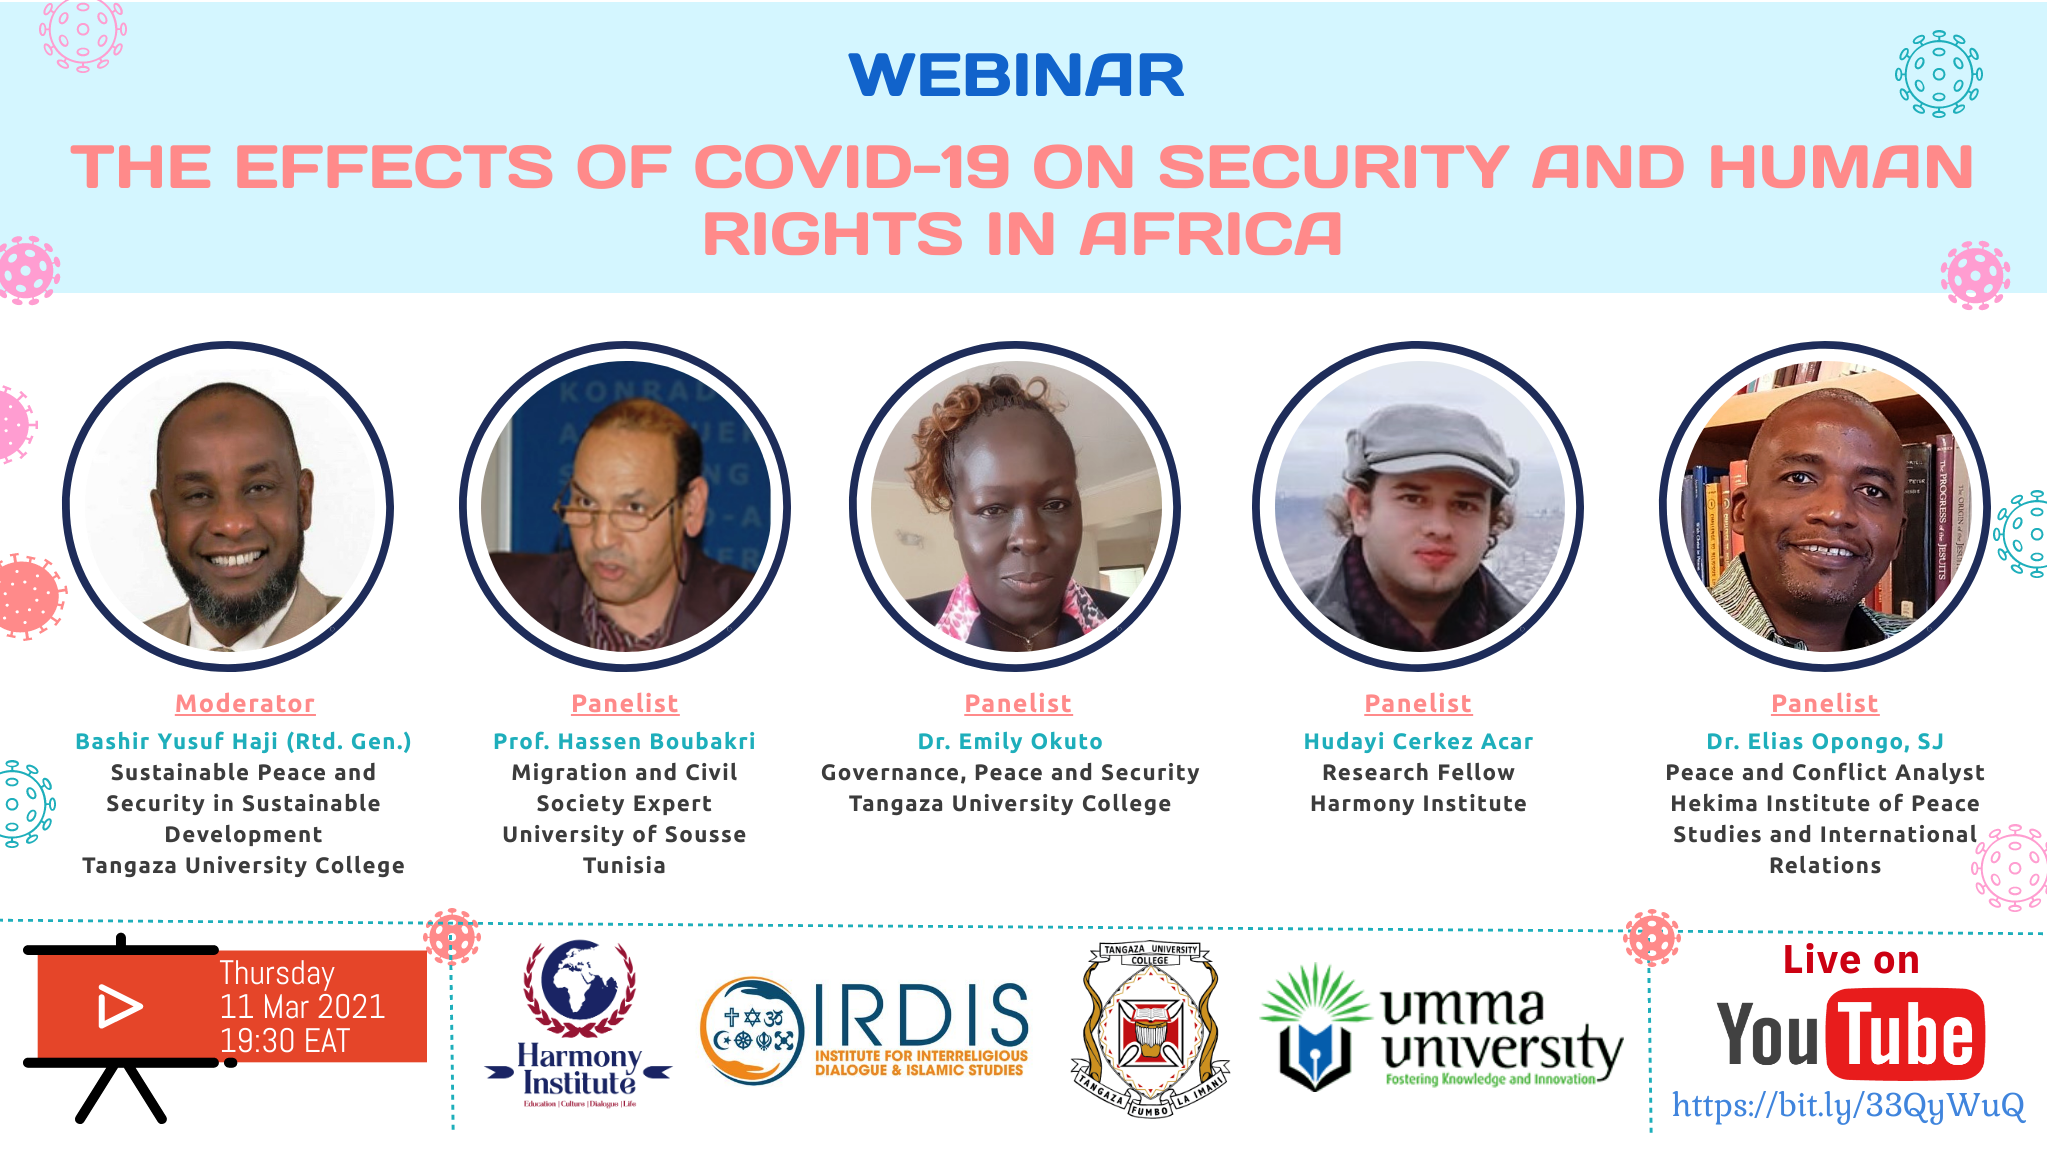 THE EFFECTS OF COVID-19 ON SECURITY AND HUMAN RIGHTS IN AFRICA